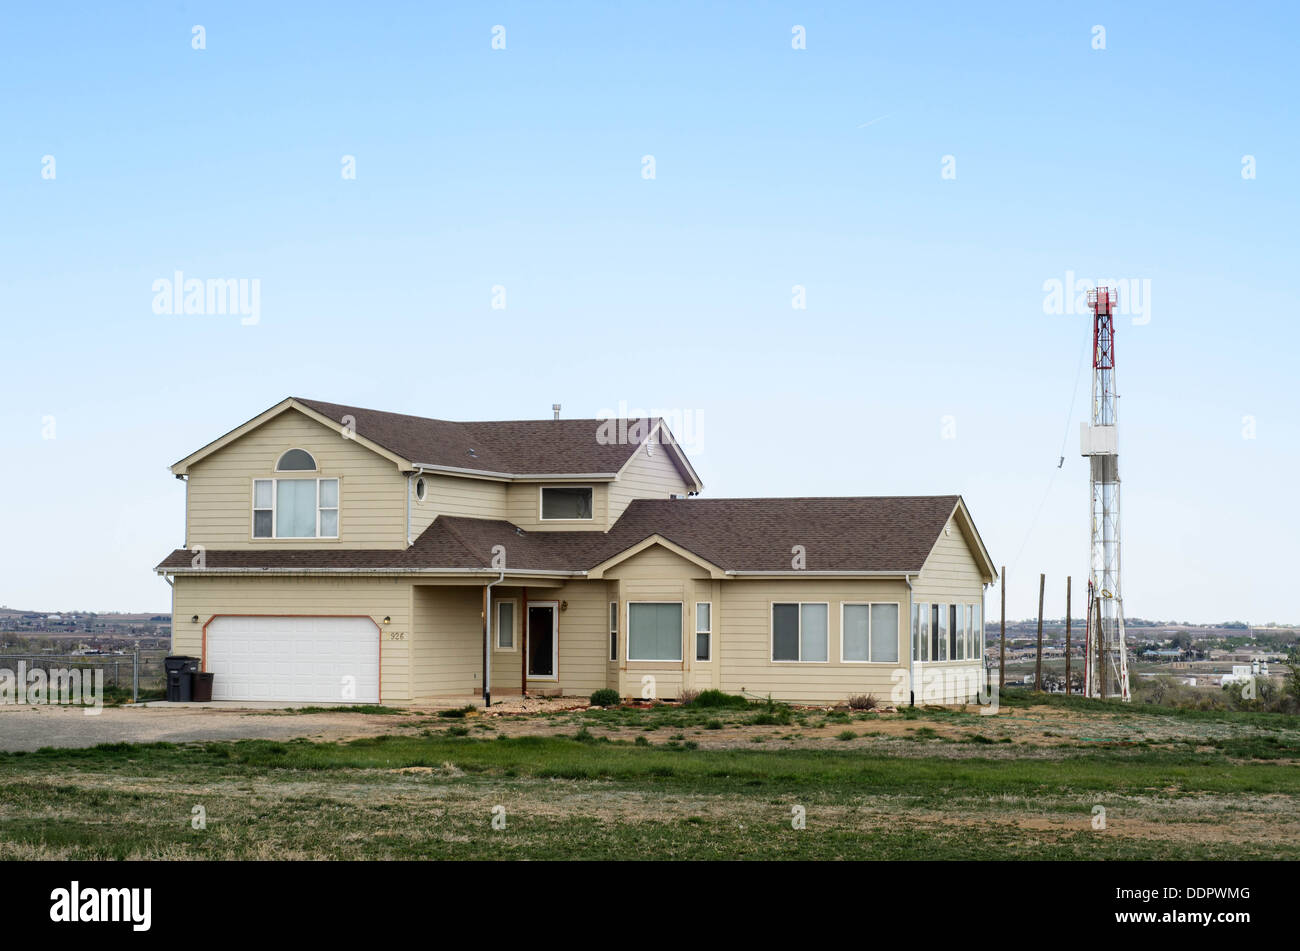 Fracking drilling platform sits behind a house in Colorado, USA Stock Photo